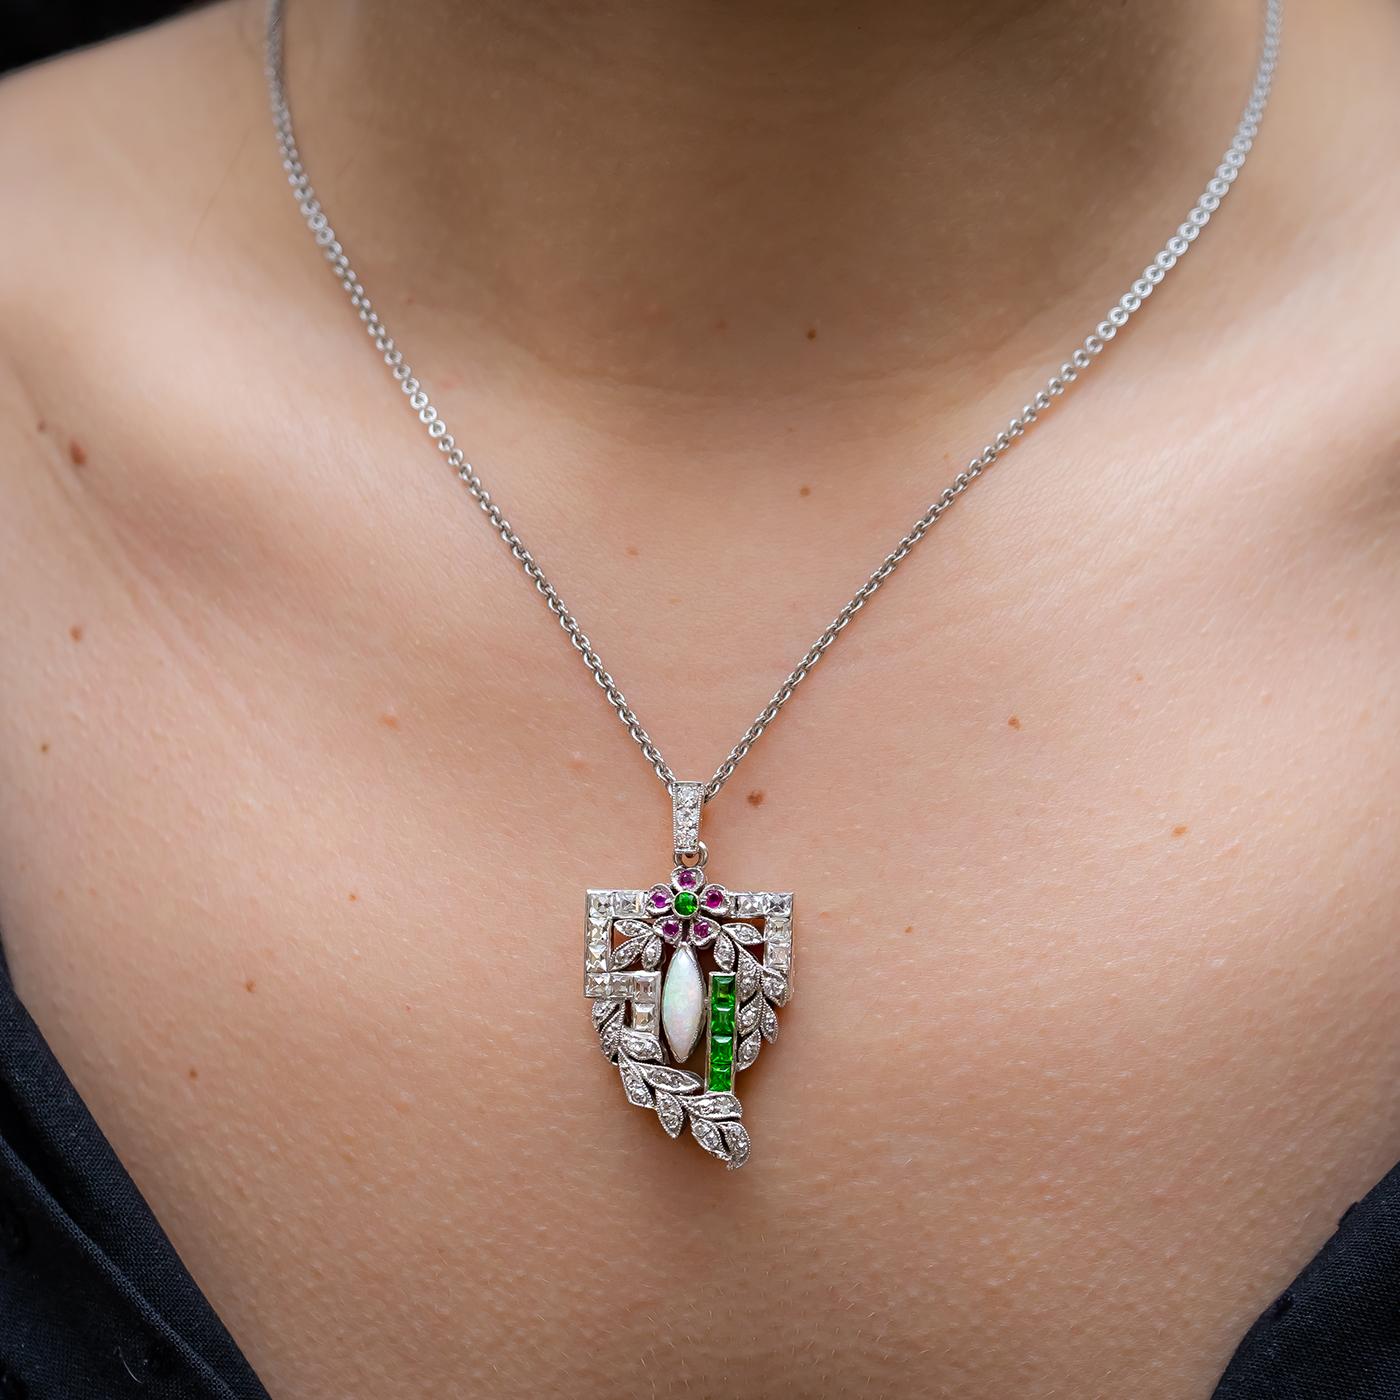 An Art Deco pendant, mounted in platinum, set with French-cut and old eight-cut diamonds, a cabochon marquise shaped opal, baguette and round cut demantoid garnets and round rubies. Estimated total diamond weight 0.90ct. The pendant measures